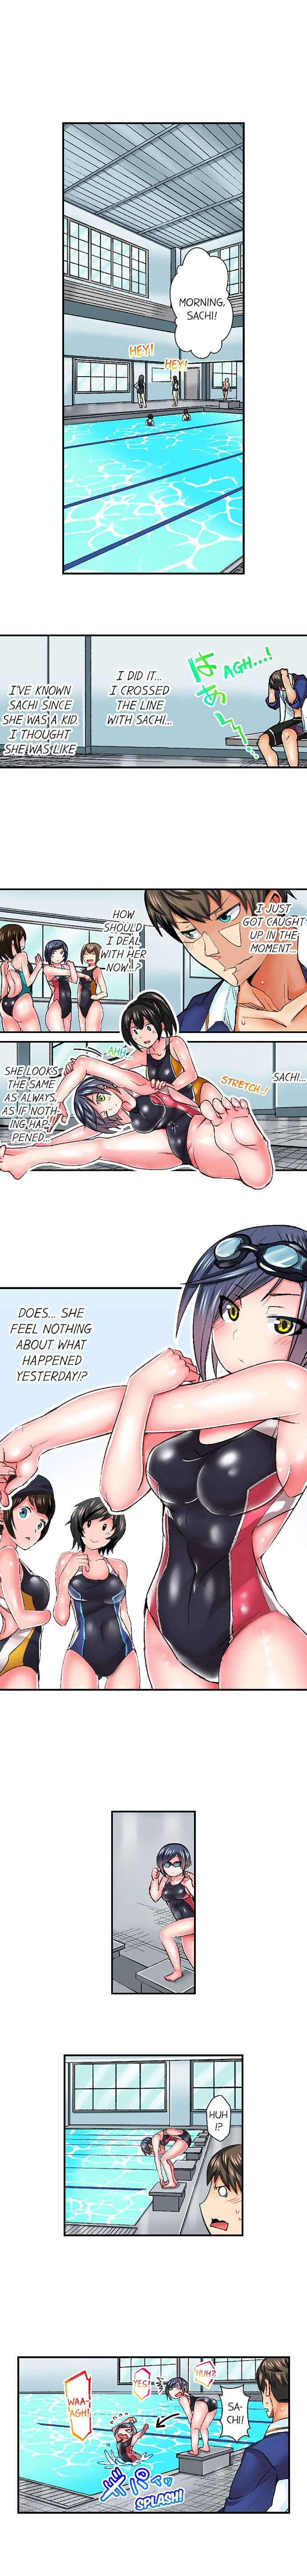 Athletes Strong Sex Drive Ch. 1 - 6 - part 2 page 1